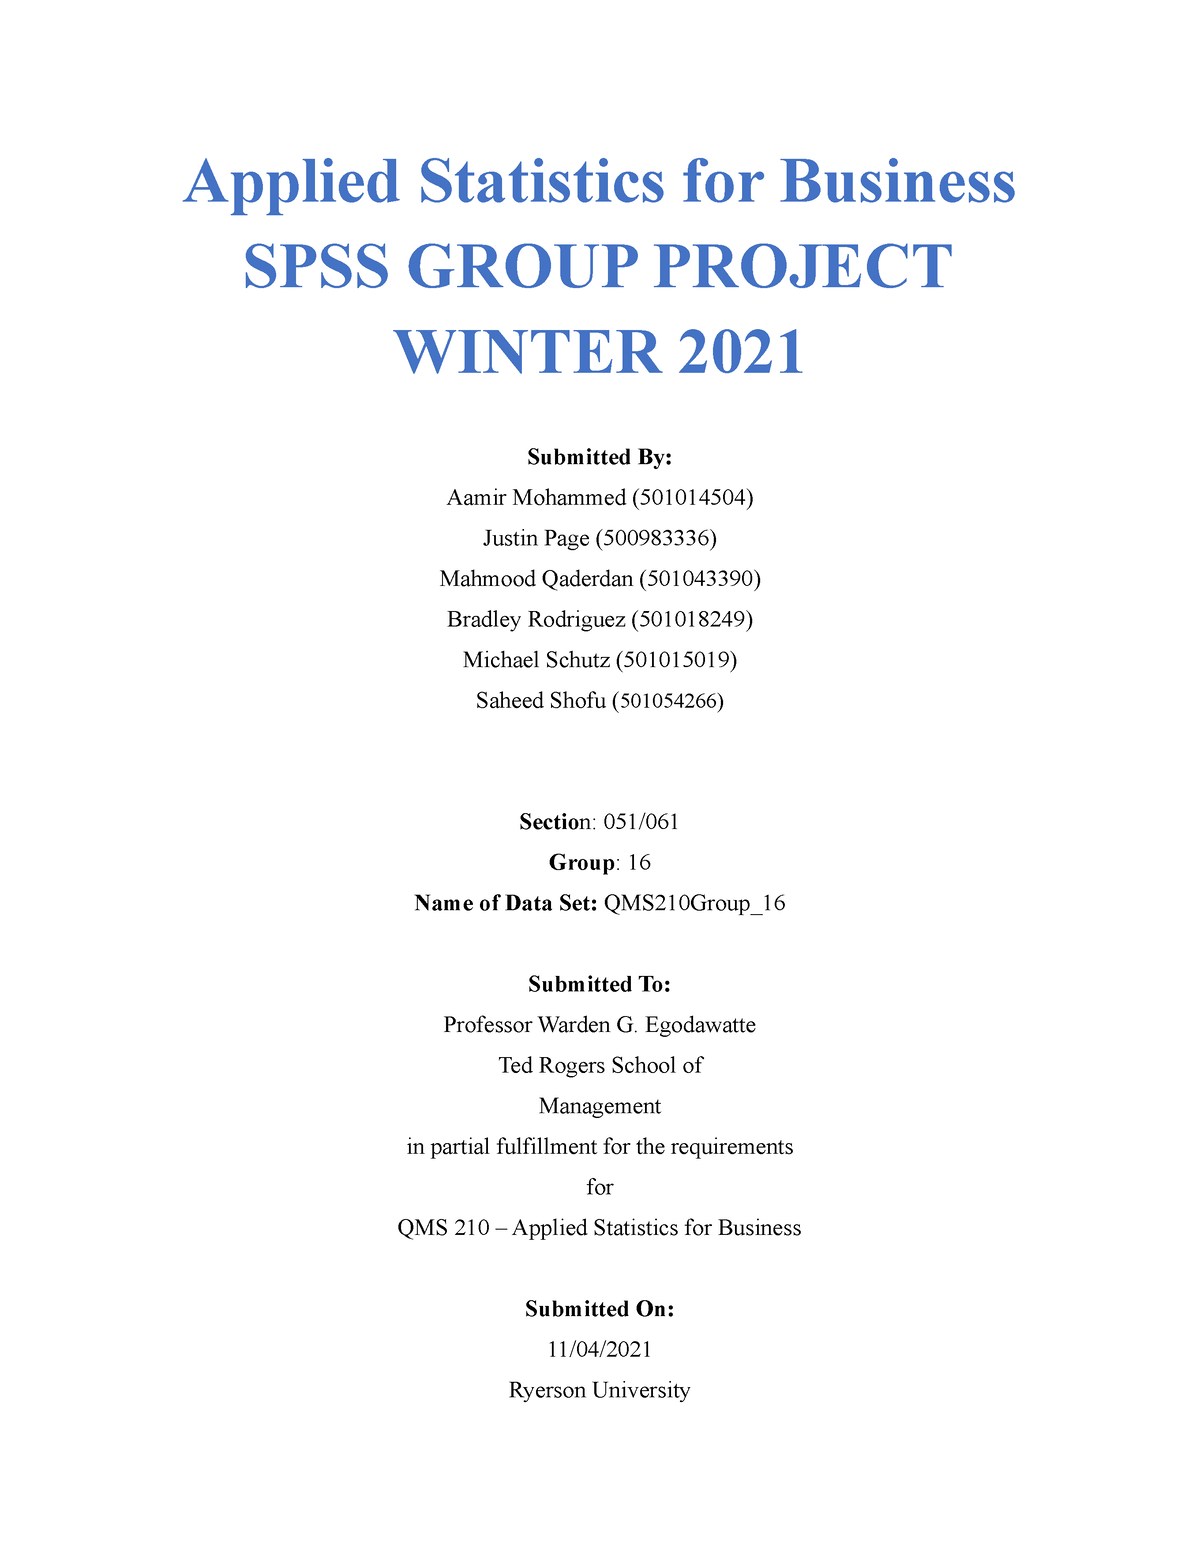 qms 202 spss project